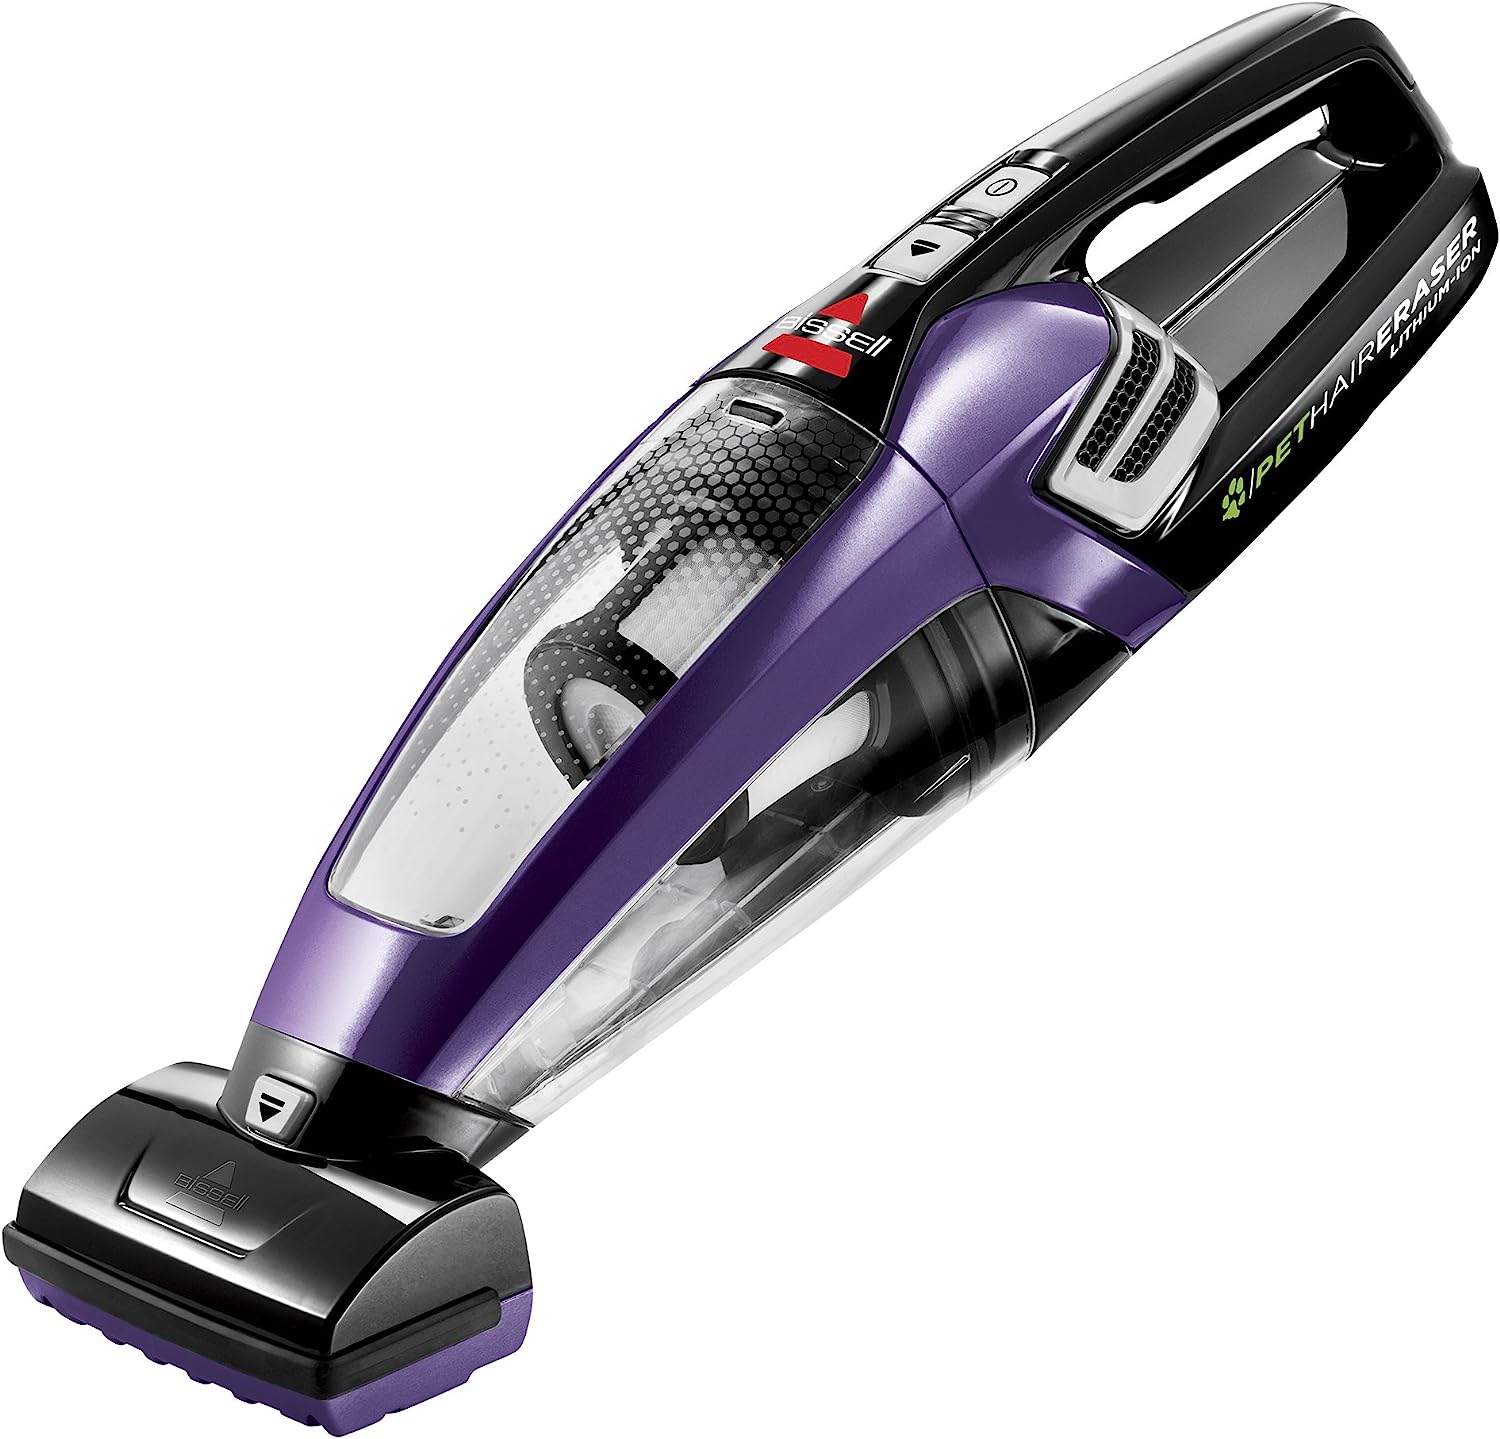 vacuum for stairs and pet hair review